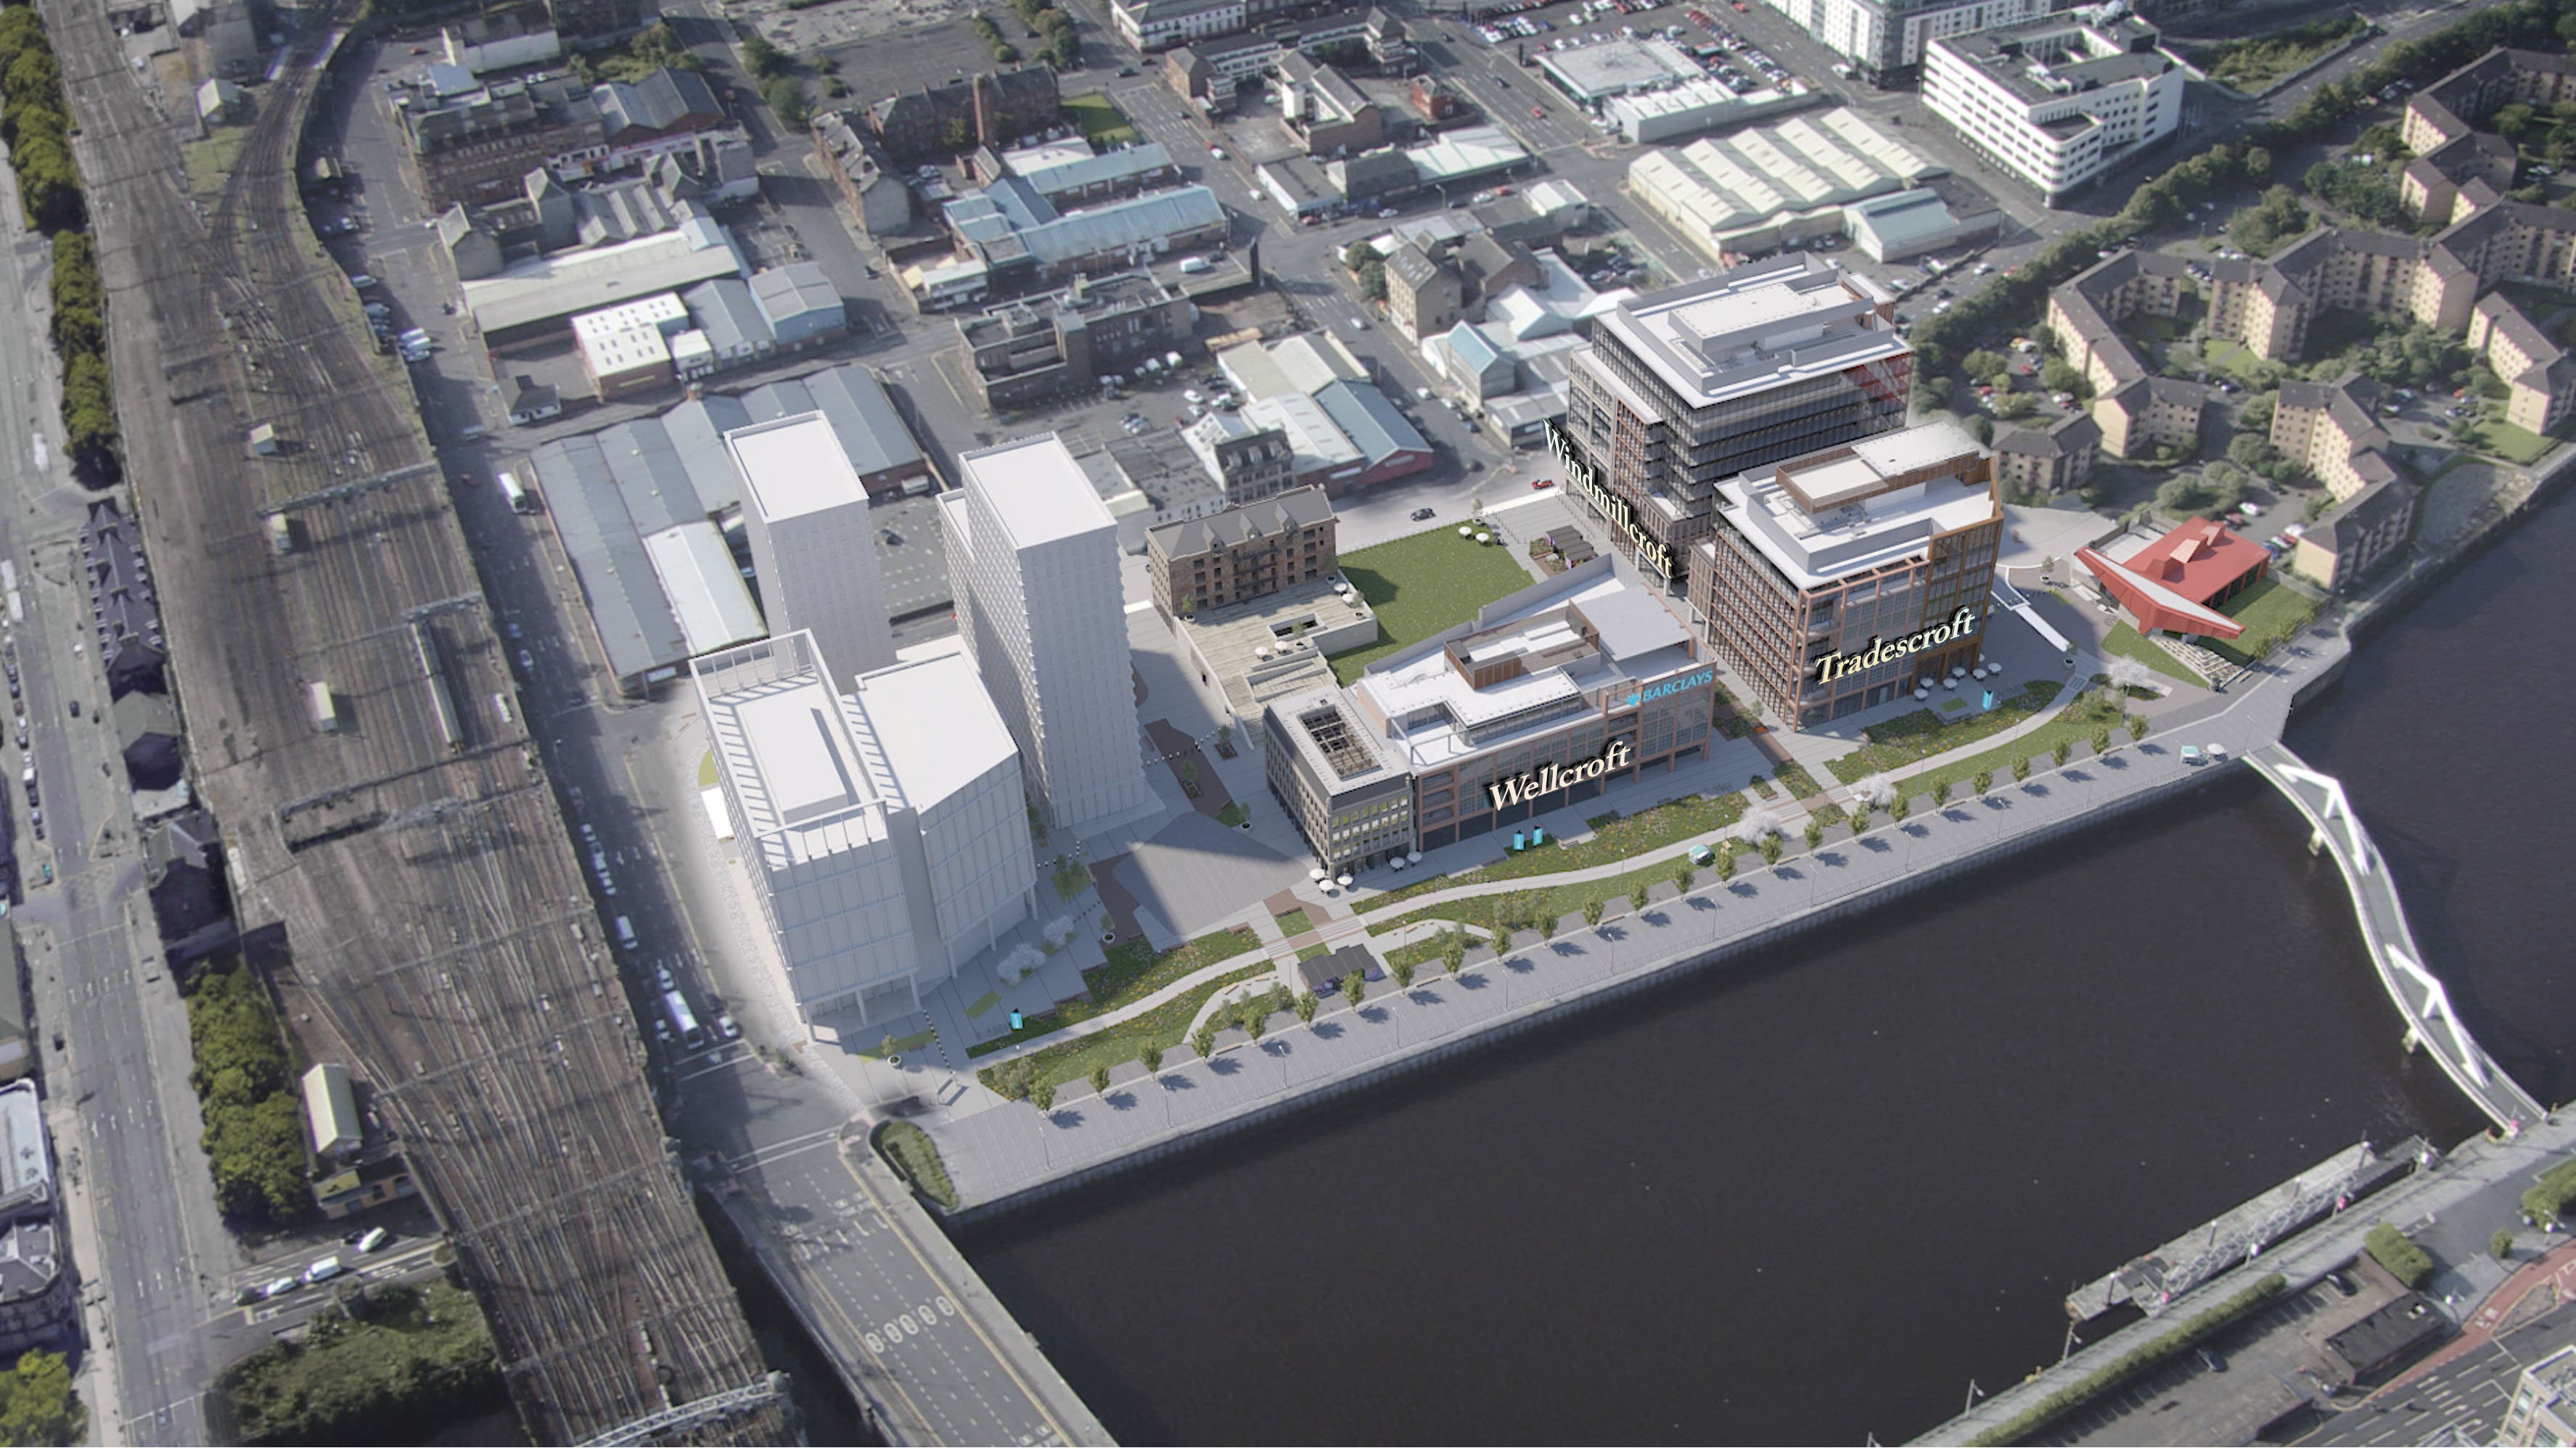 Video: Glasgow's industrial heritage to be honoured at Barclays campus